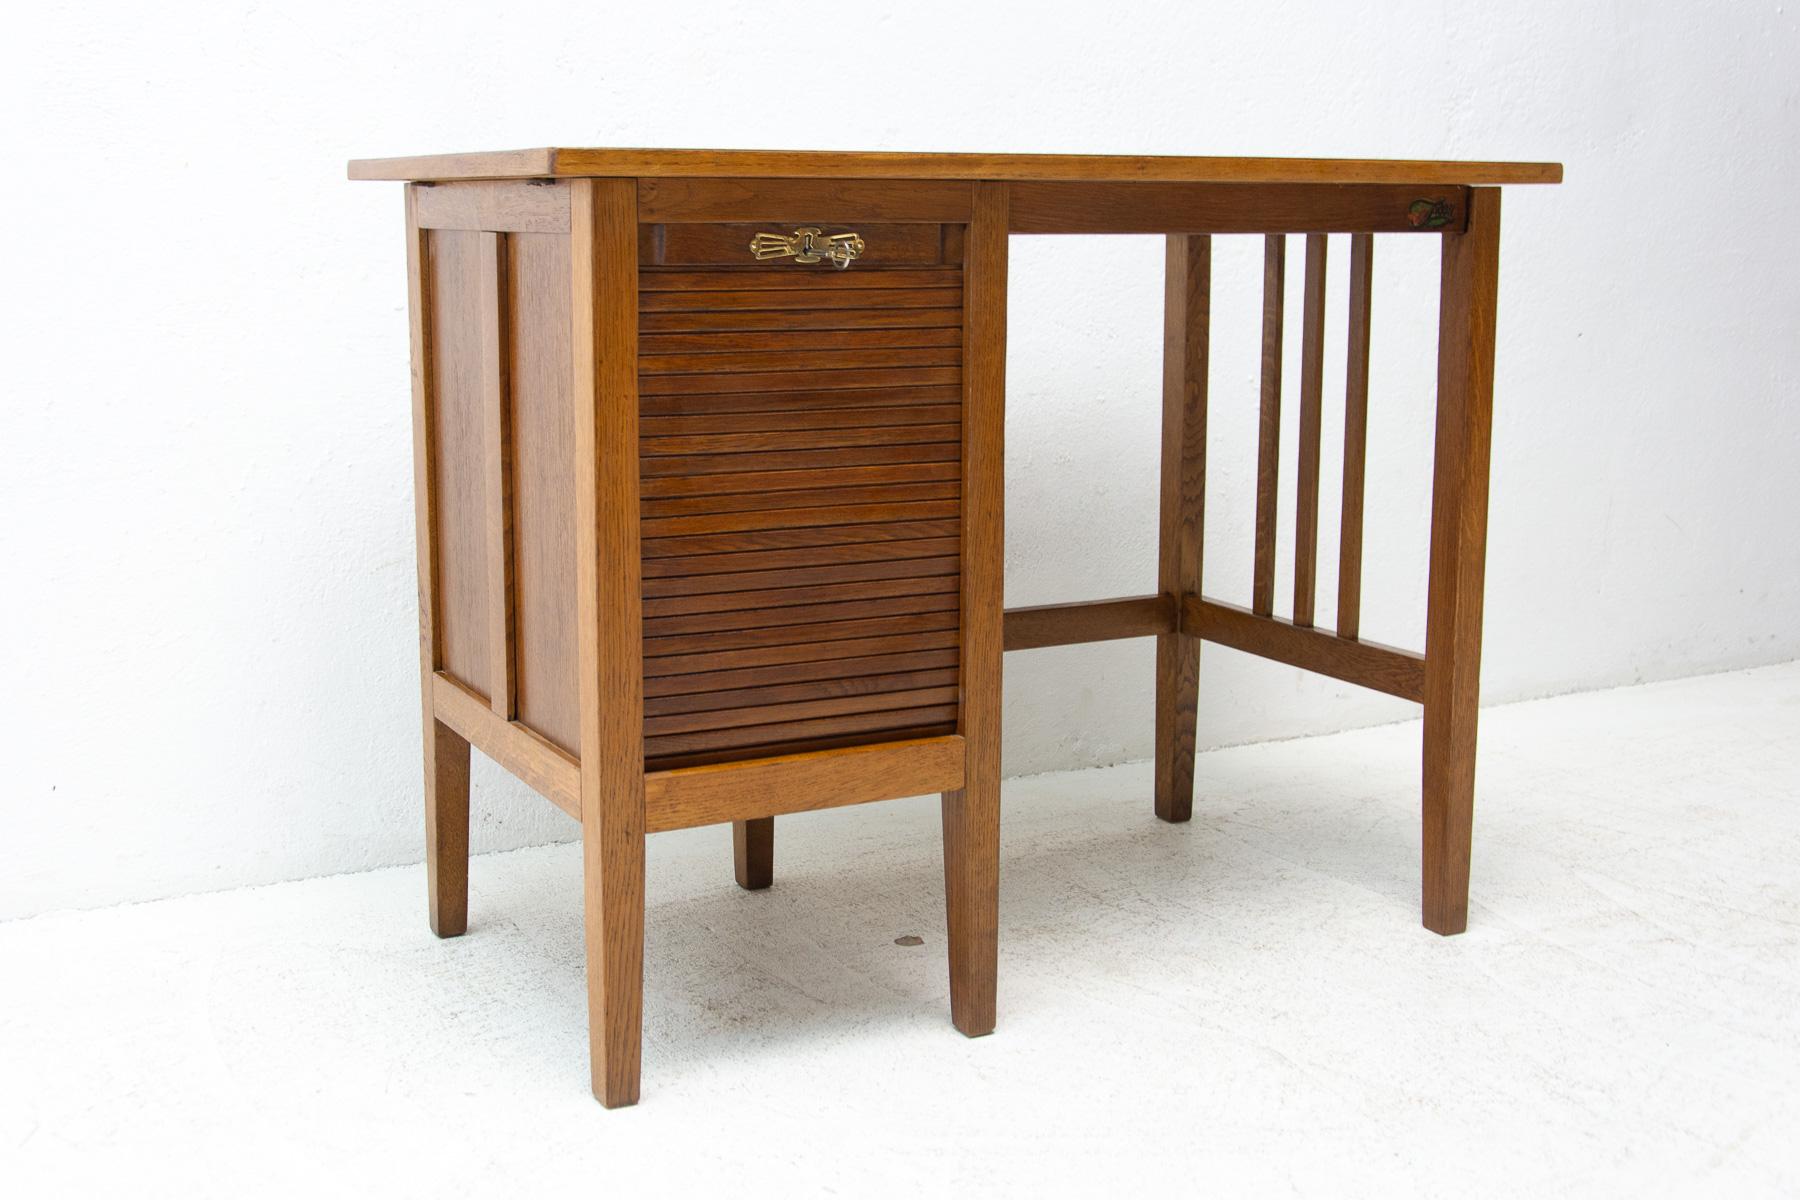 Stained Antique Roller Blind Writing Desk Jerry, 1930s, Bohemia For Sale